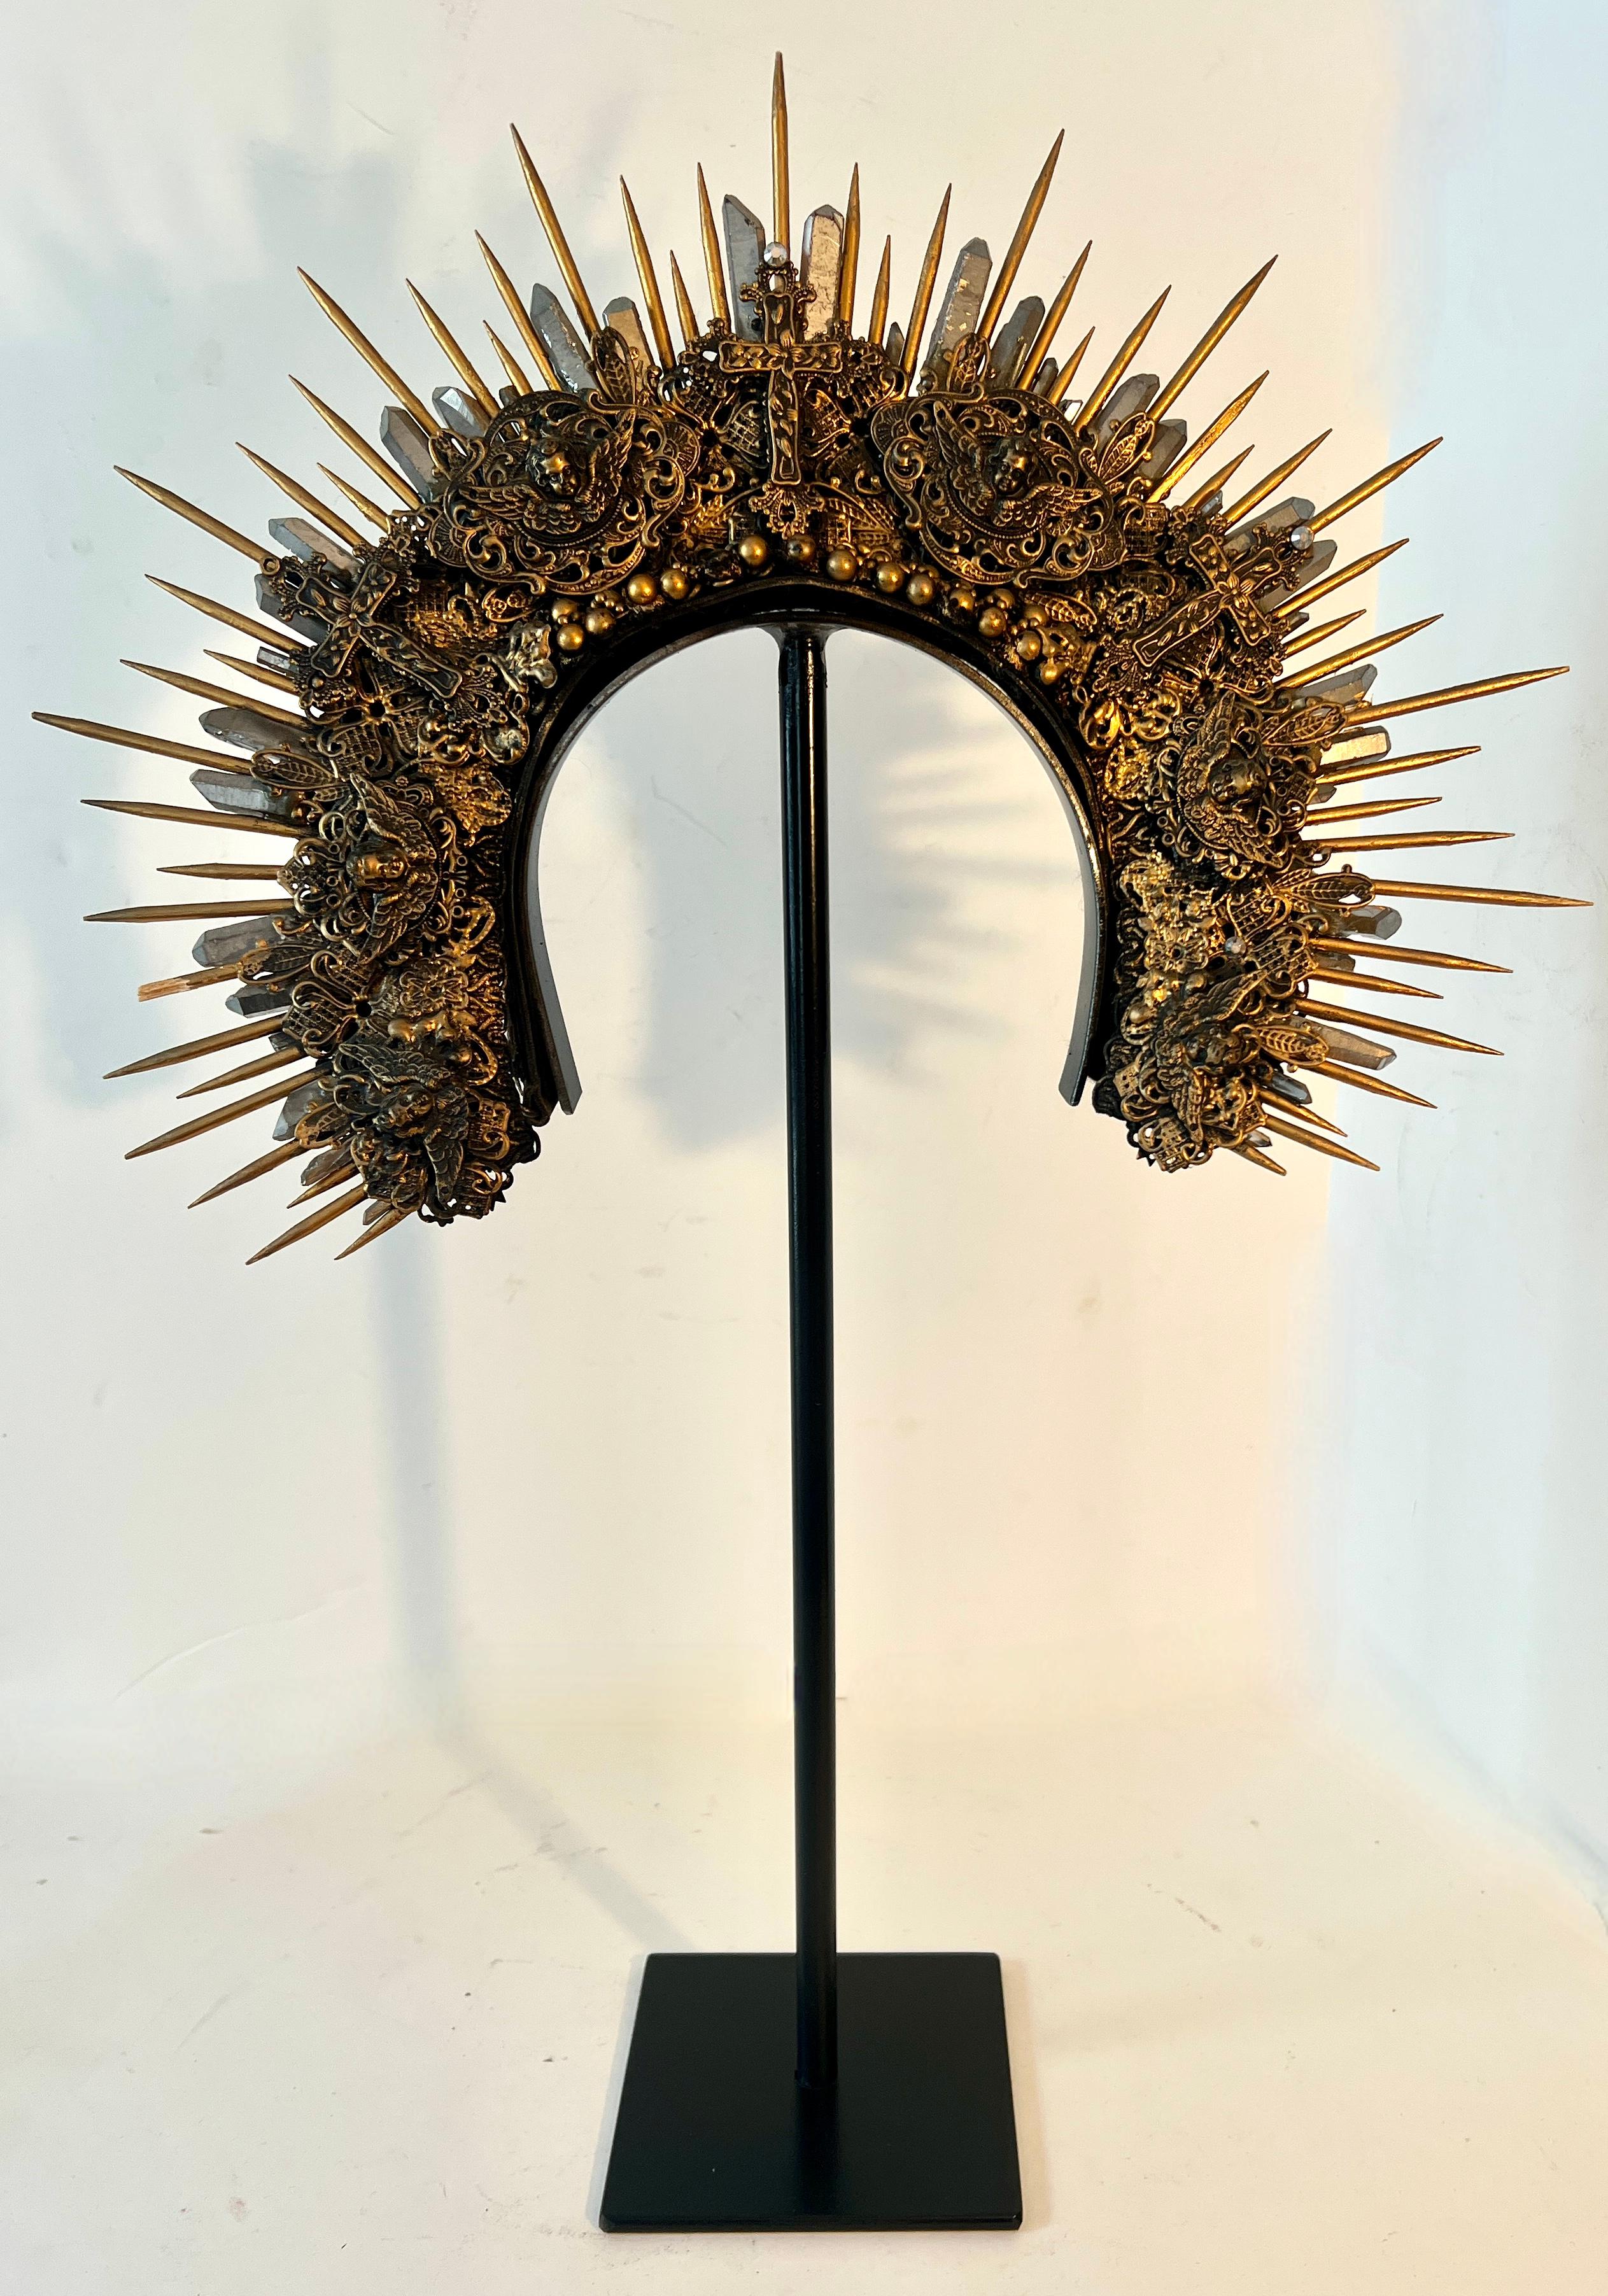 A wonderful hand crafted Head Dress from a Broadway Production, acquired in NYC.

The piece is made of wood skewers, beads, crystal, crosses and material - all cast in gold - and while it has an impressive look, it is hand made for a production, so